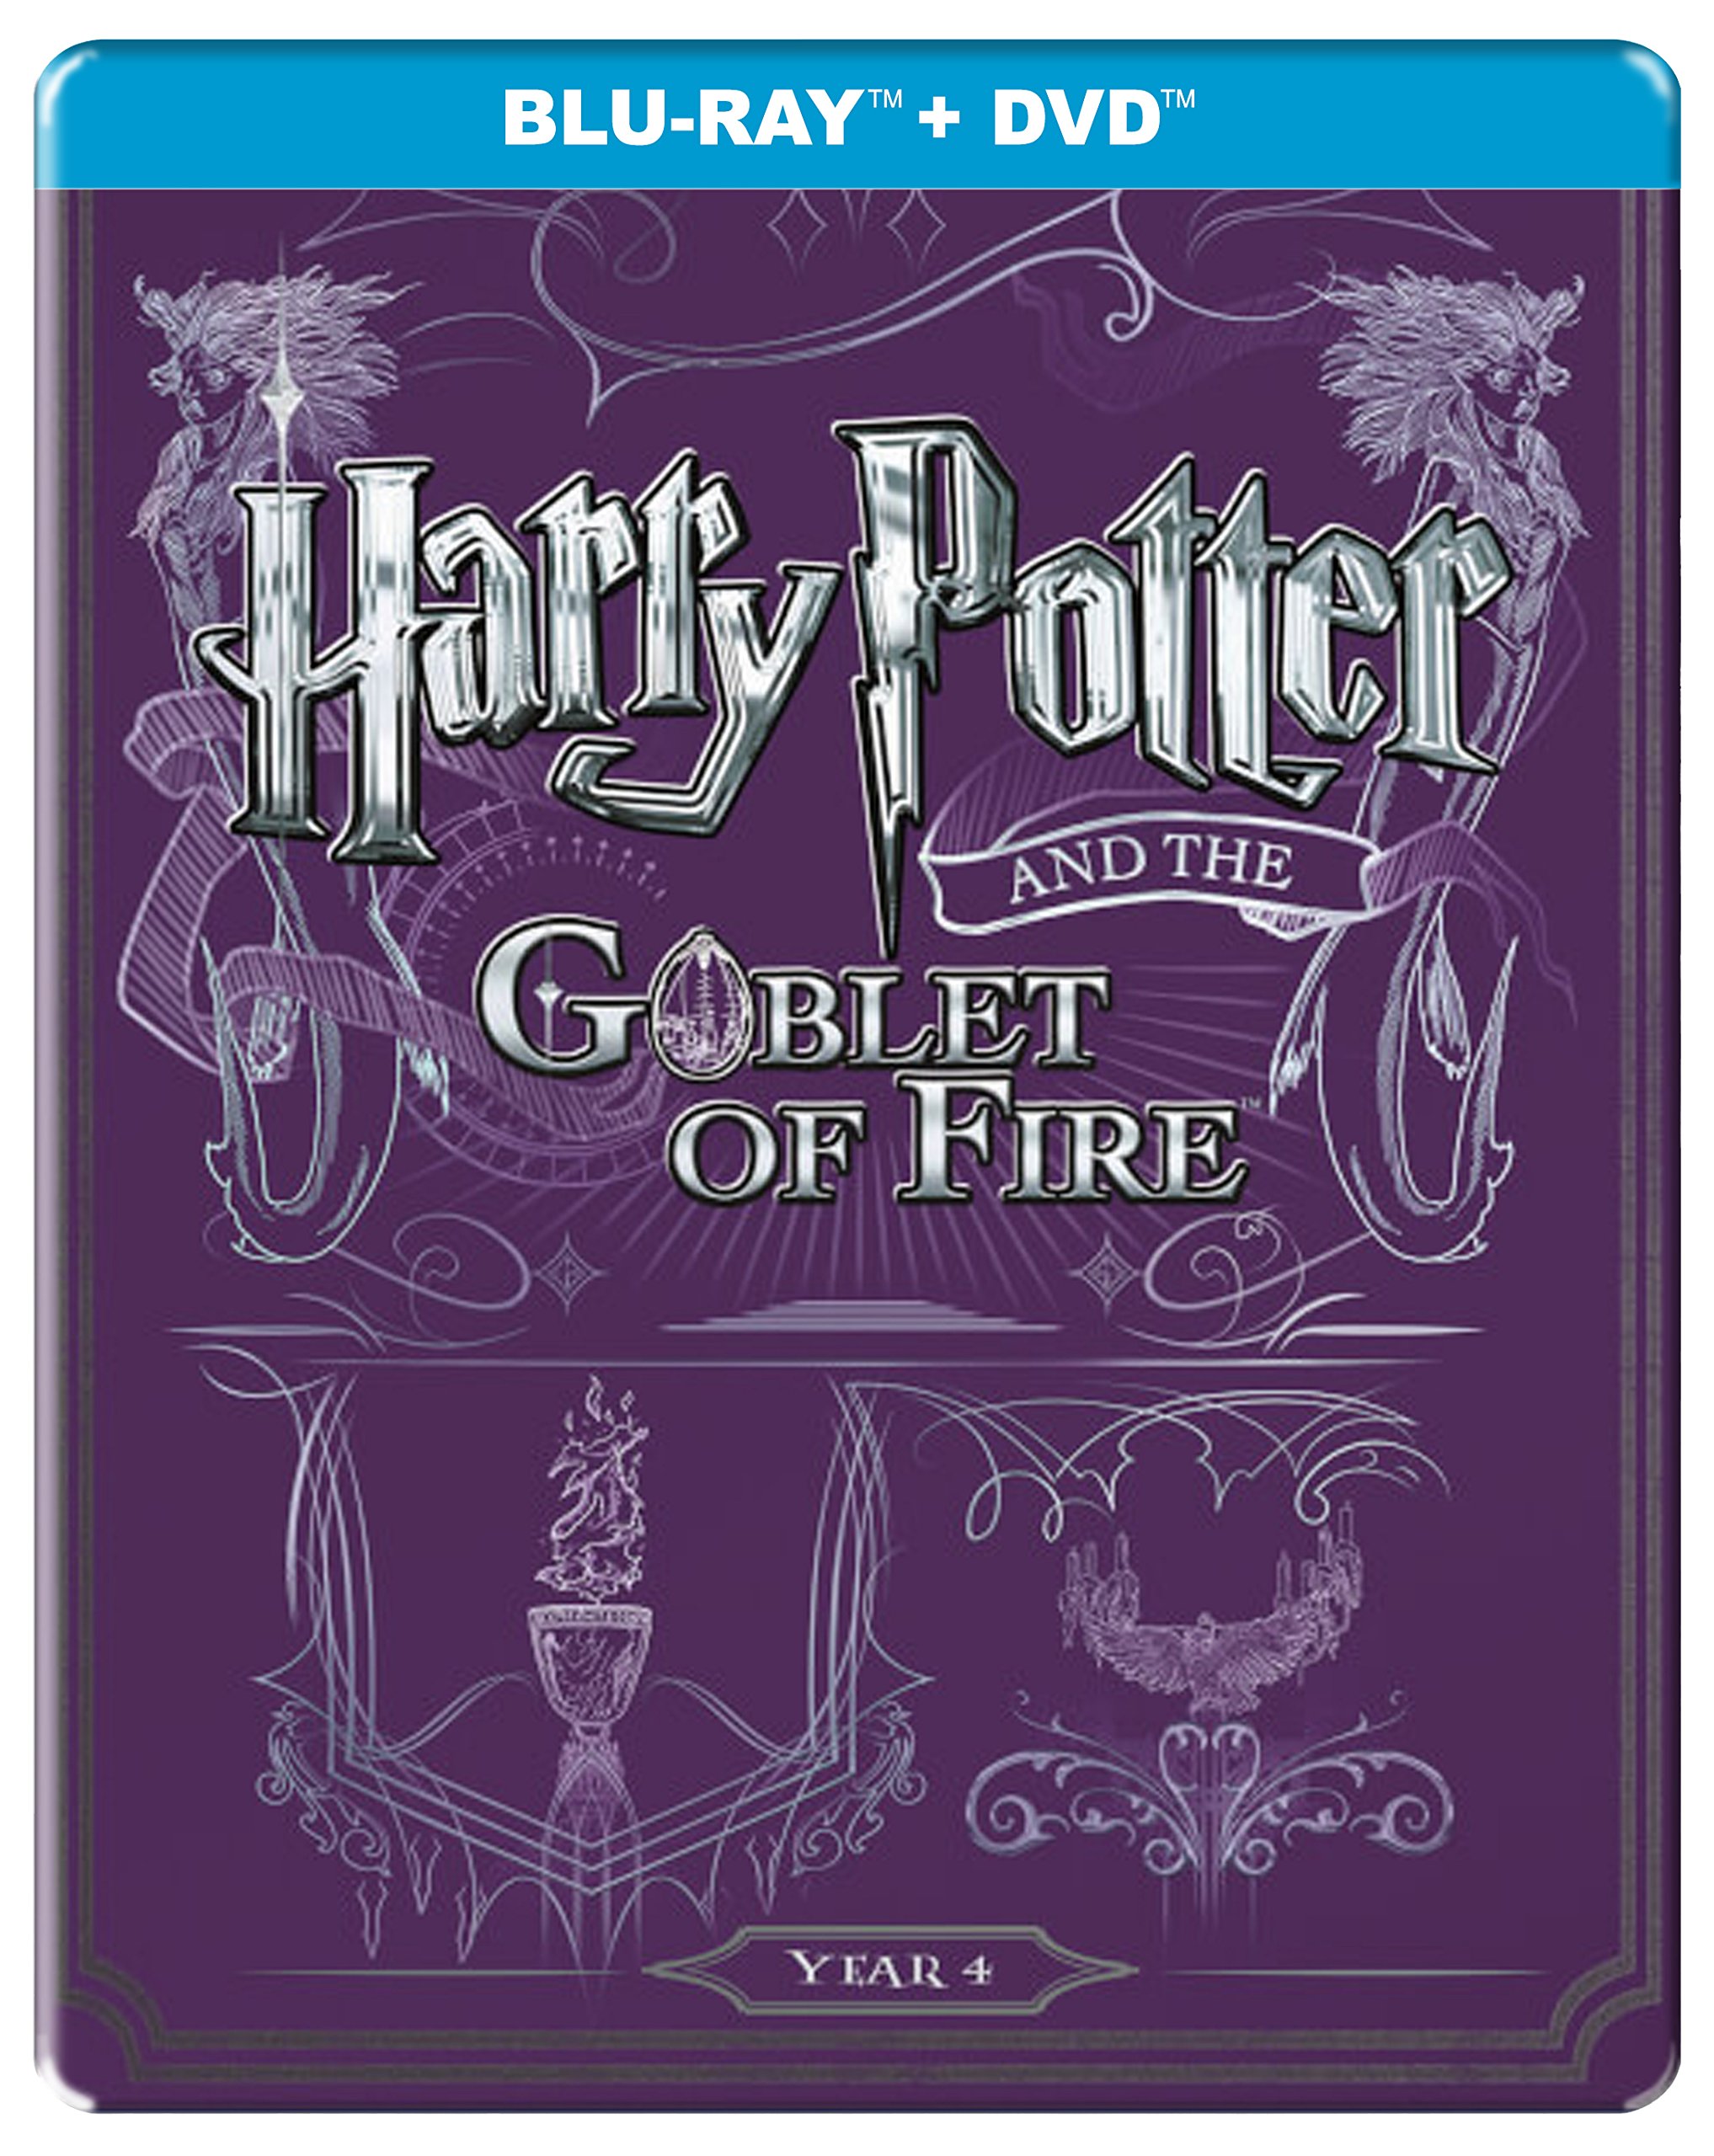 harry-potter-and-the-goblet-of-fire-2005-year-4-steelbook-blu-ray-dvd-2-disc